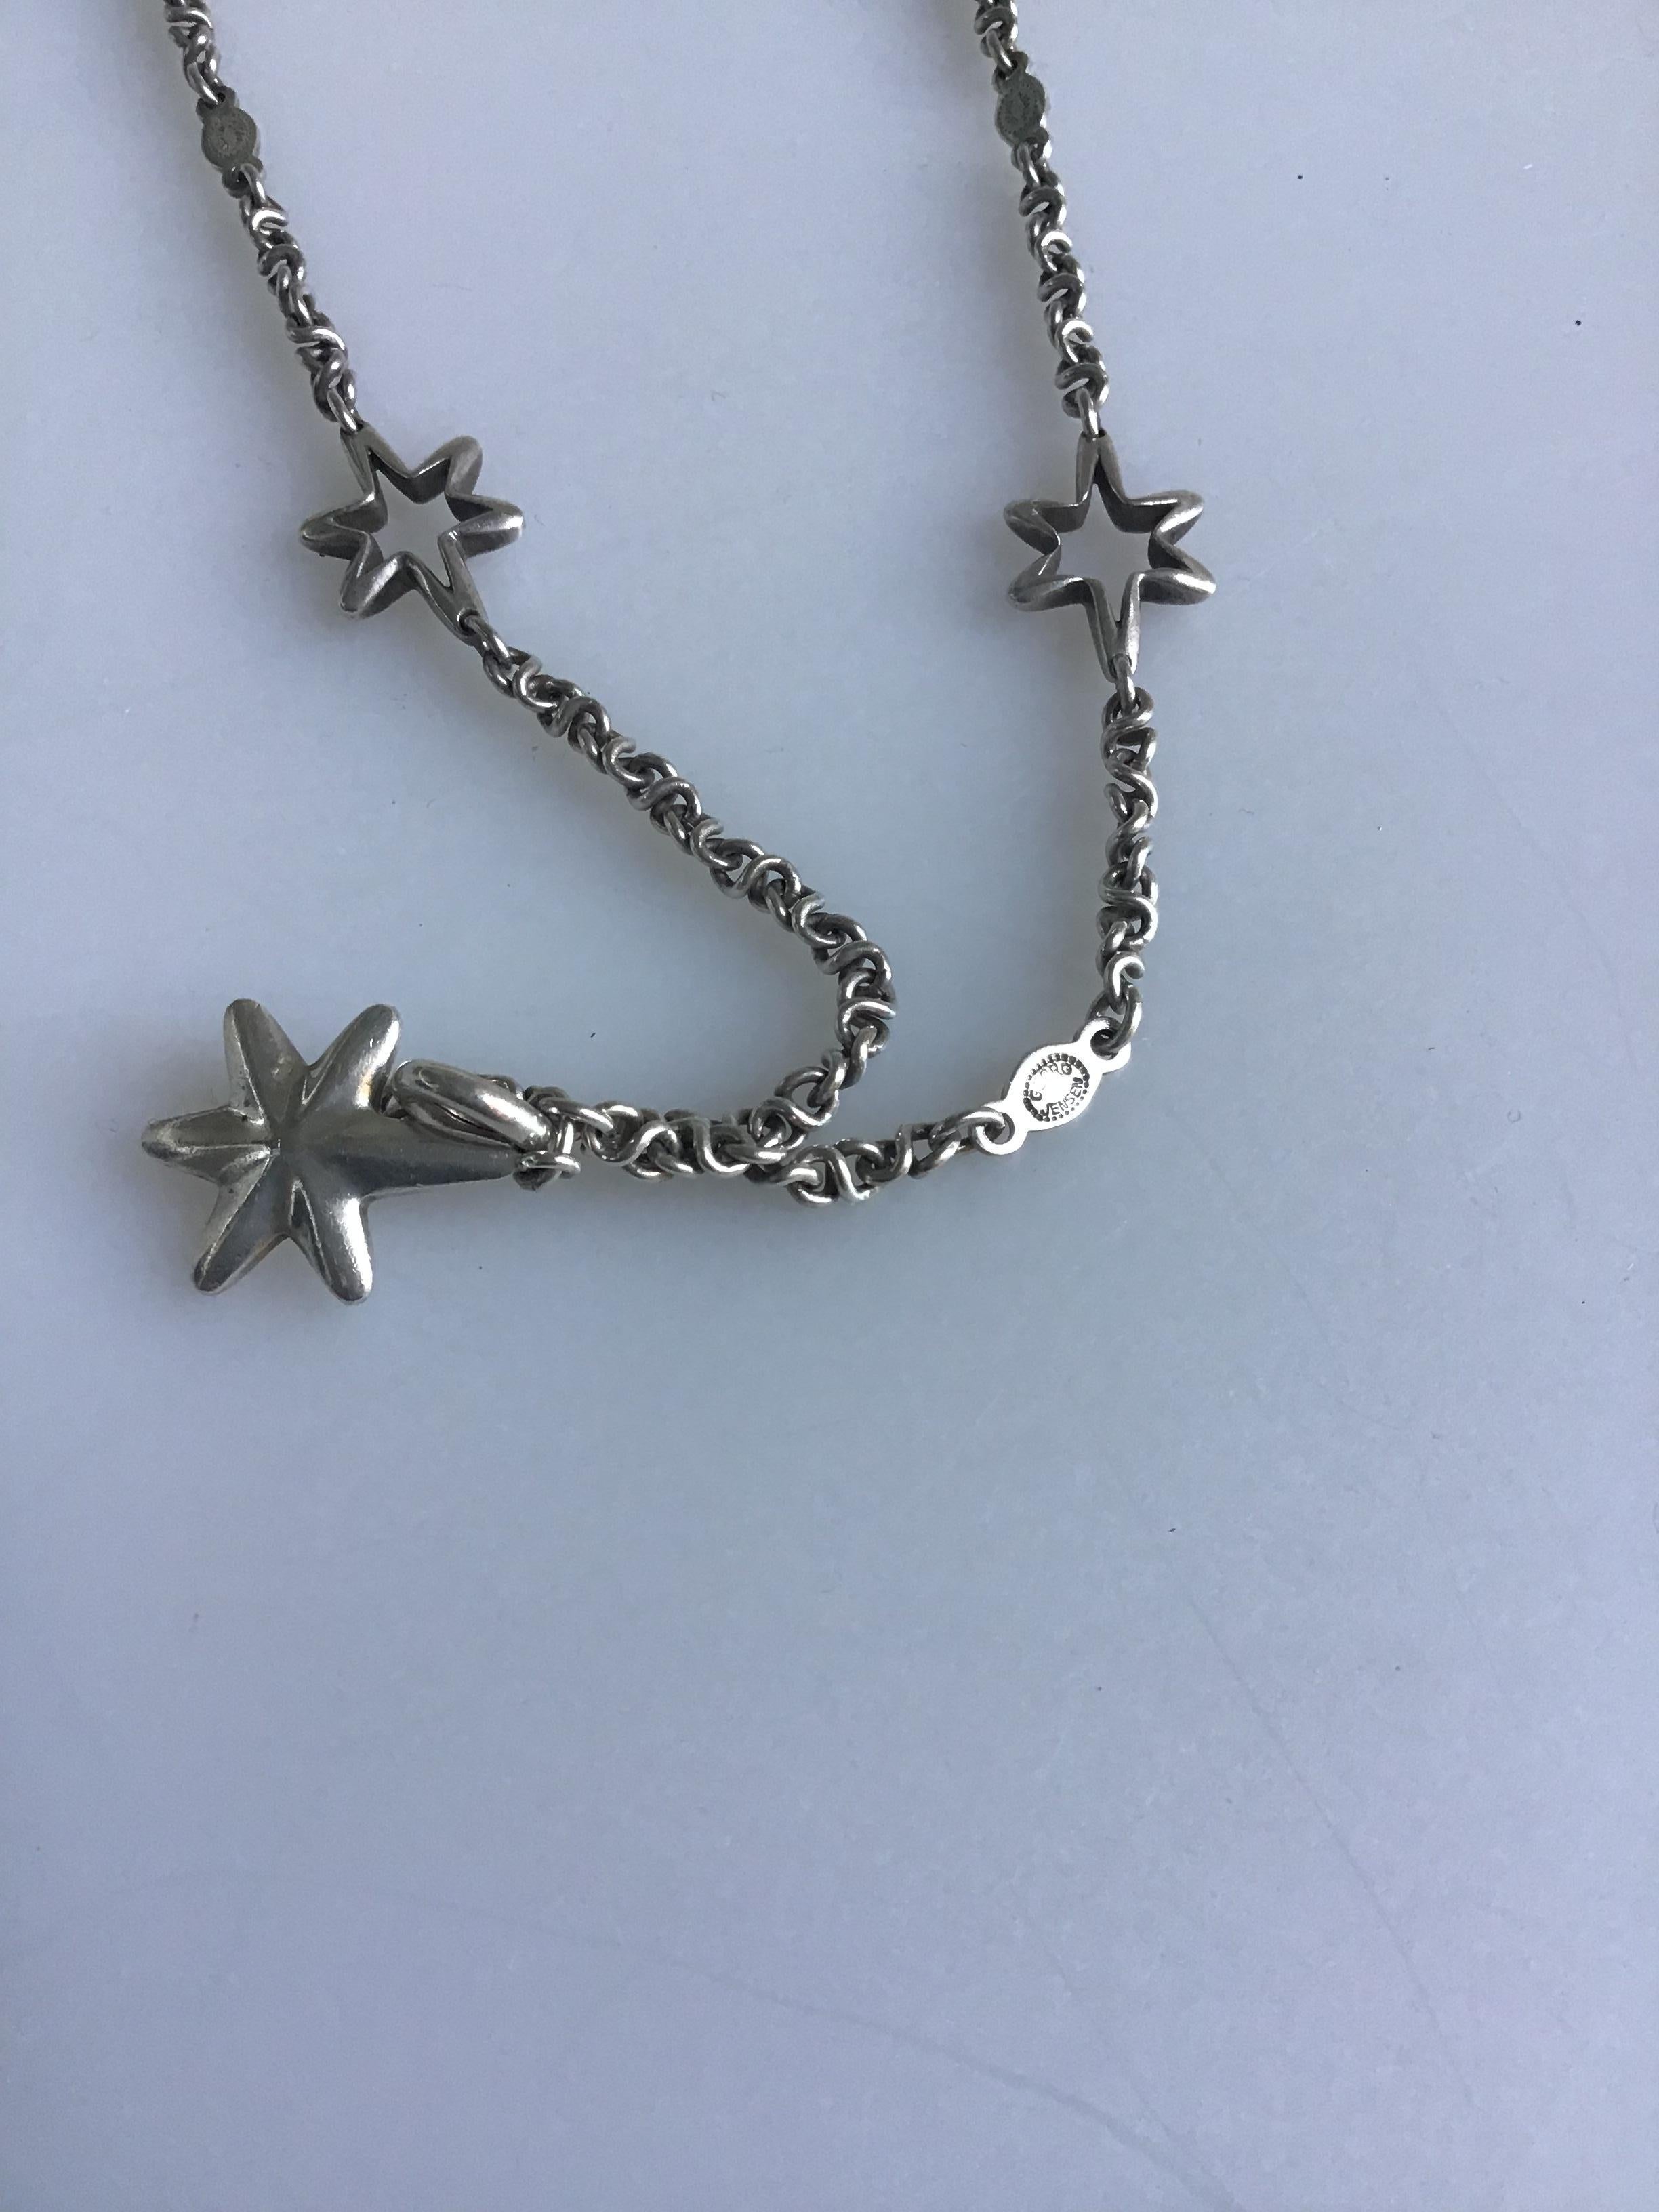 Georg Jensen Sterling Silver Star Necklace 88 cm L (34 41/64 in.). Variable length, where a section of the necklace can serve a pendant/enhancement. (9+1stars) Total length 89.5 cm / 35,2 inches. Weighs 45.6 g / 1.60 oz.